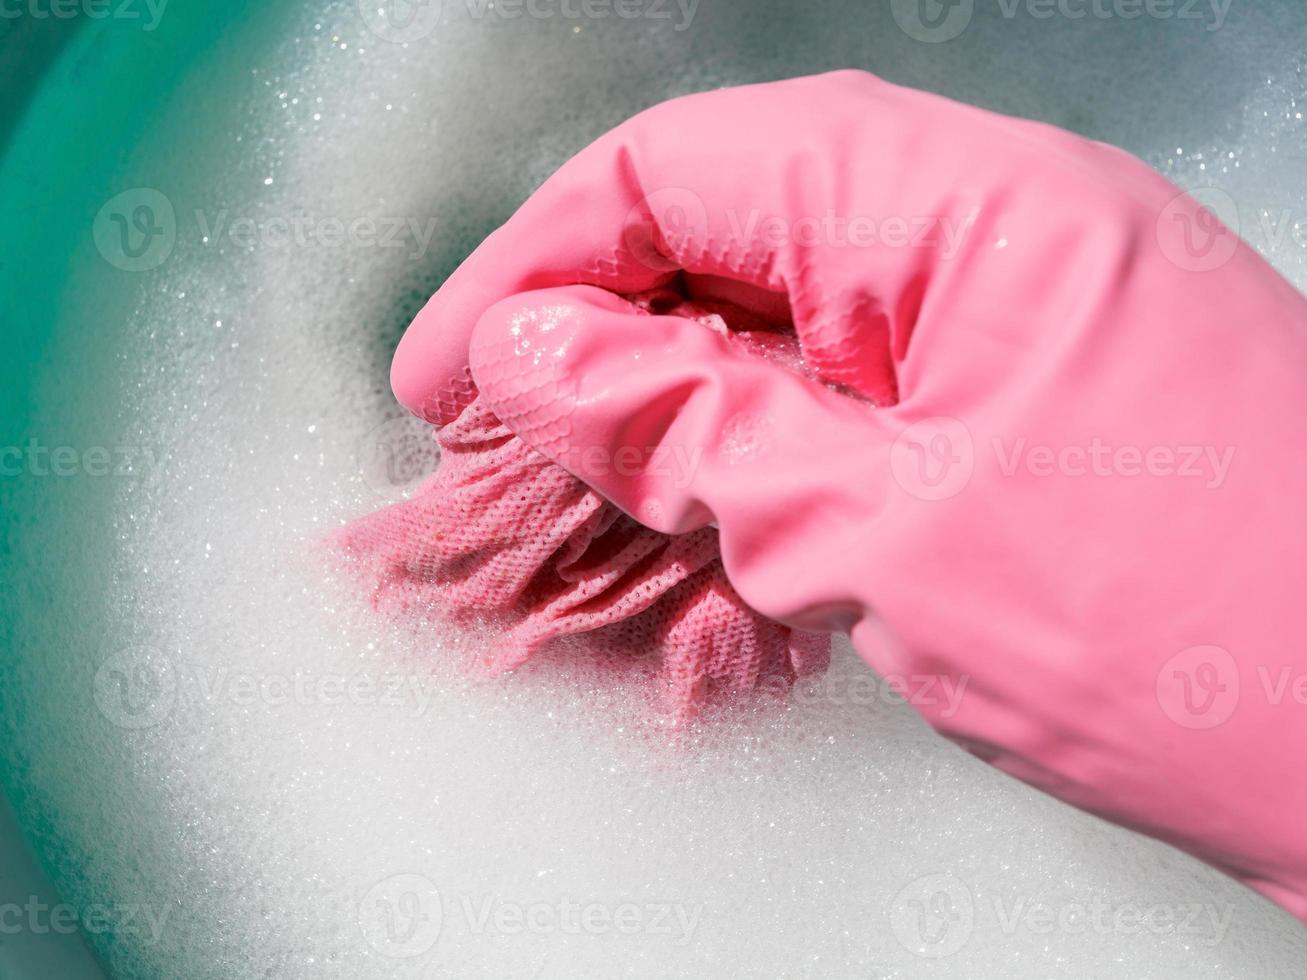 hand in pink rubber glove rinsing wet cloth photo